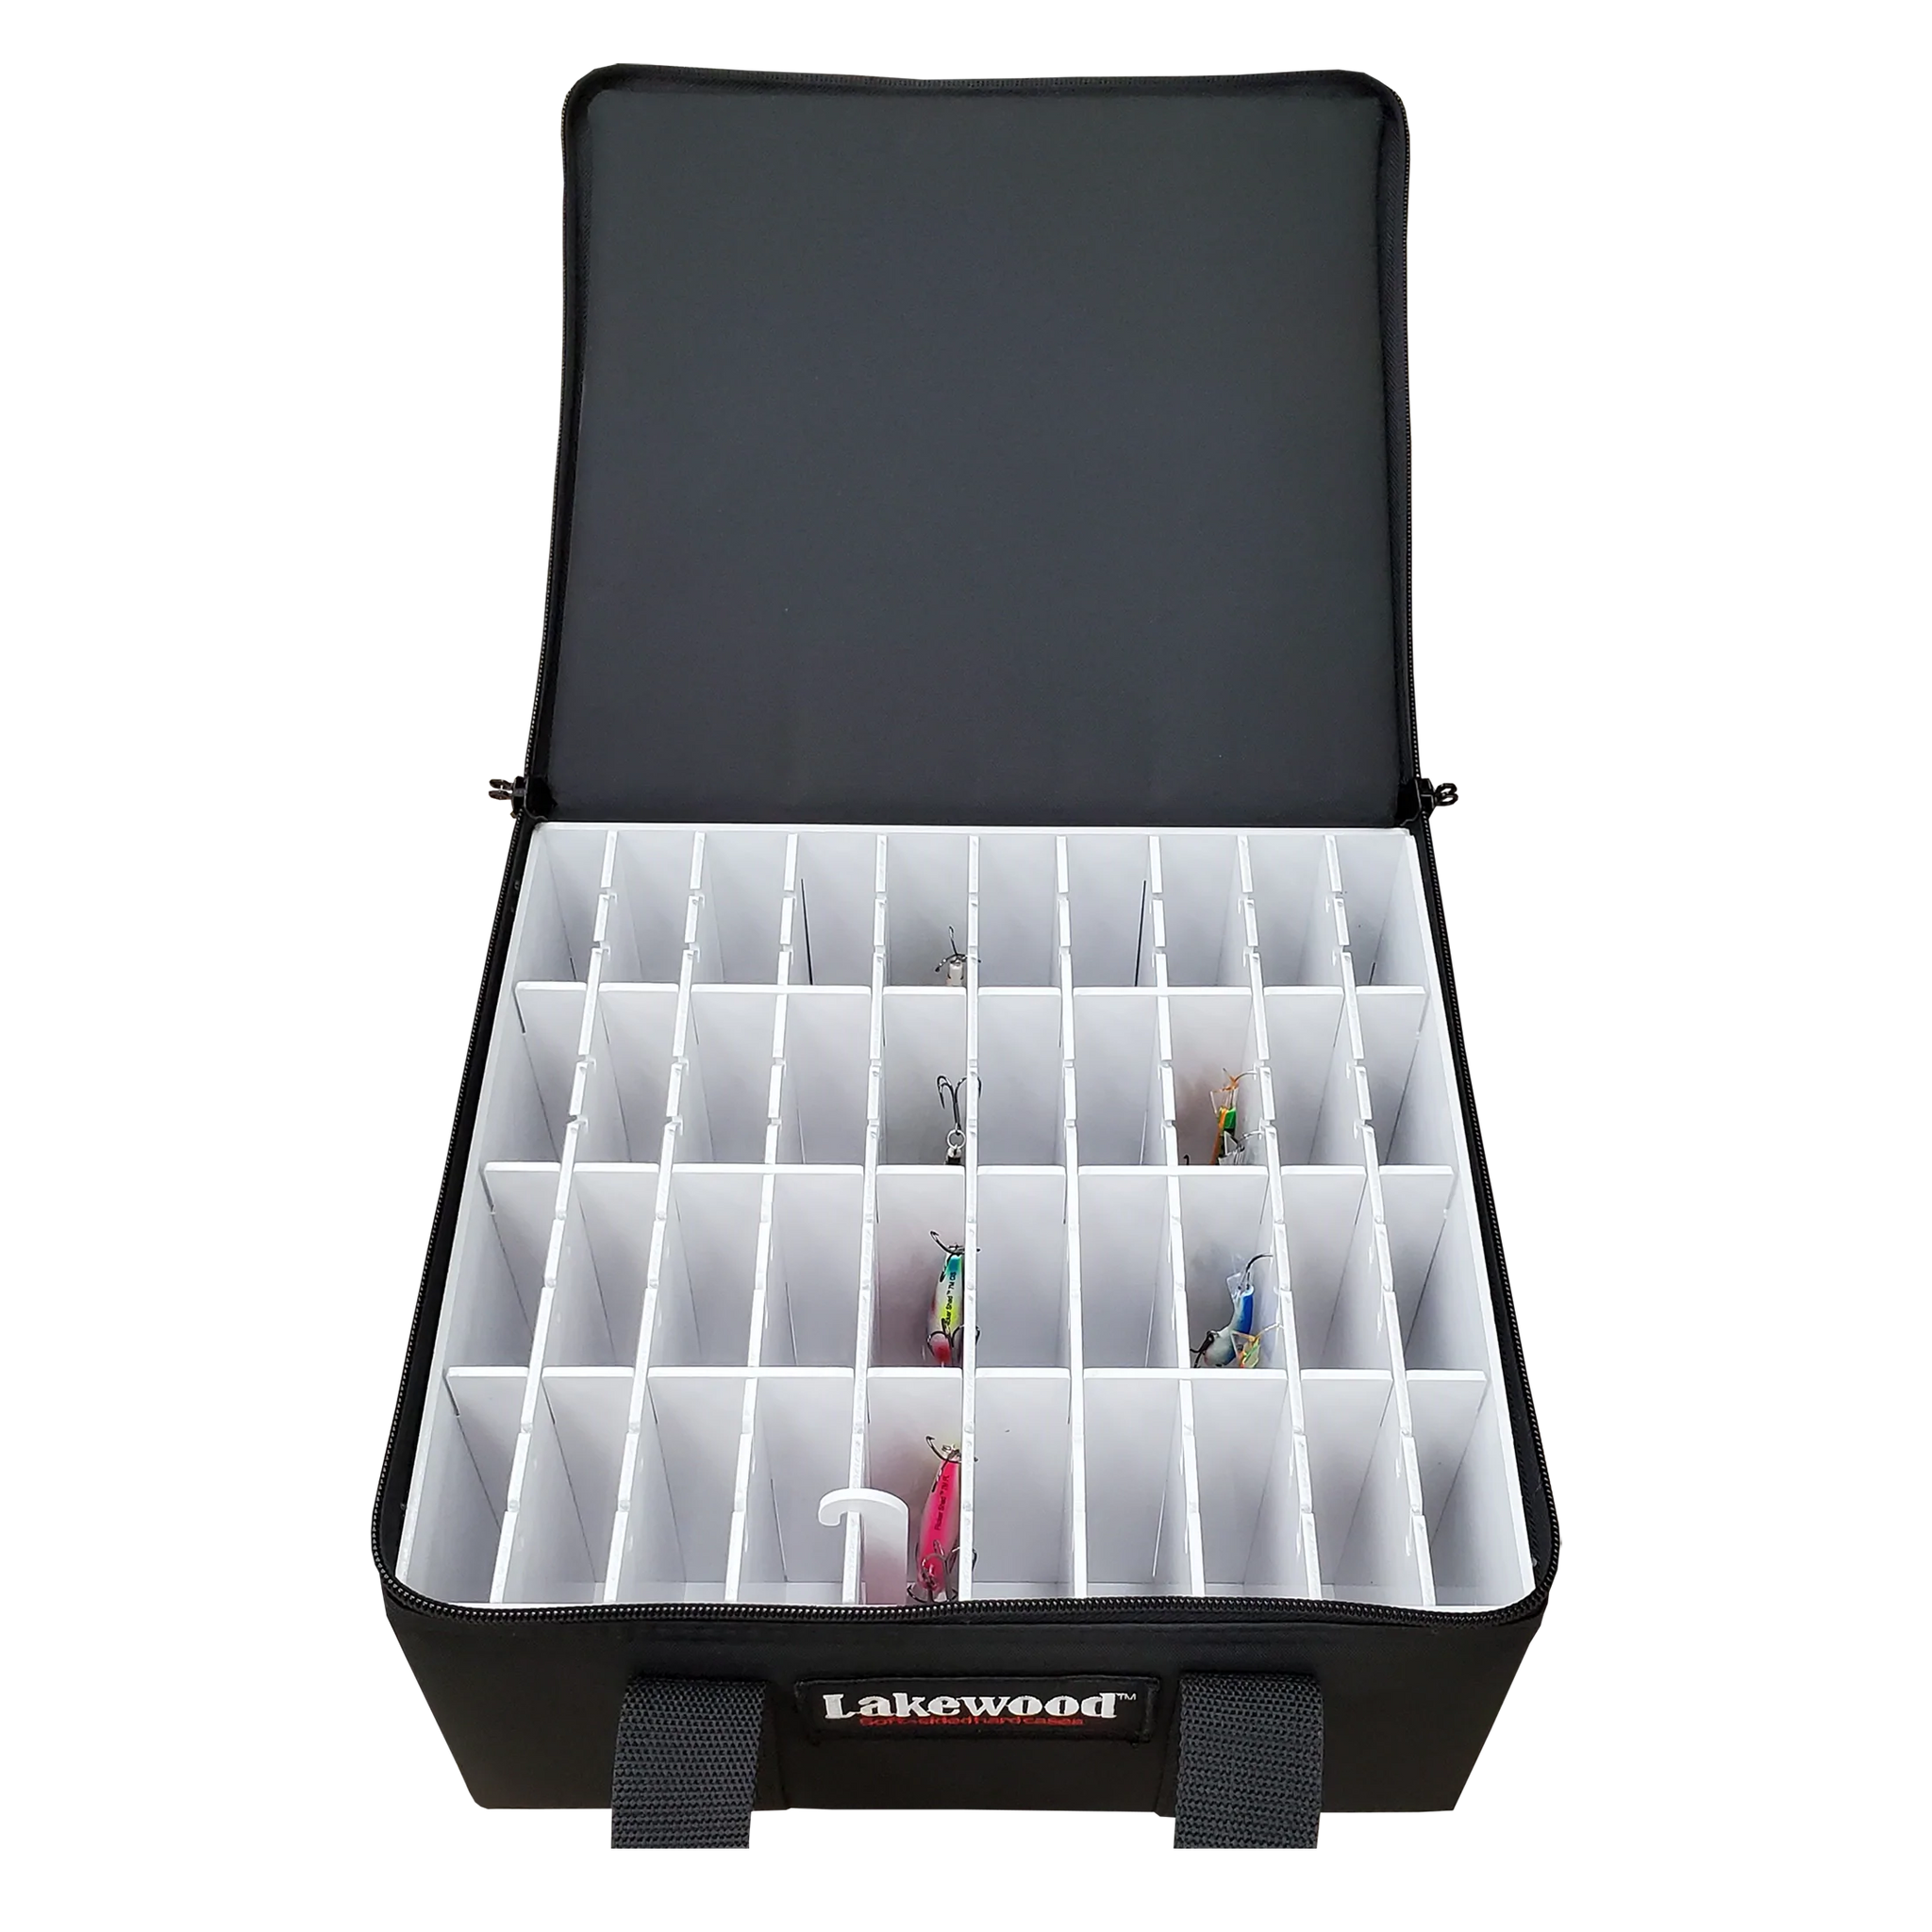 Large Saltwater Tackle Box - Lakewood Products